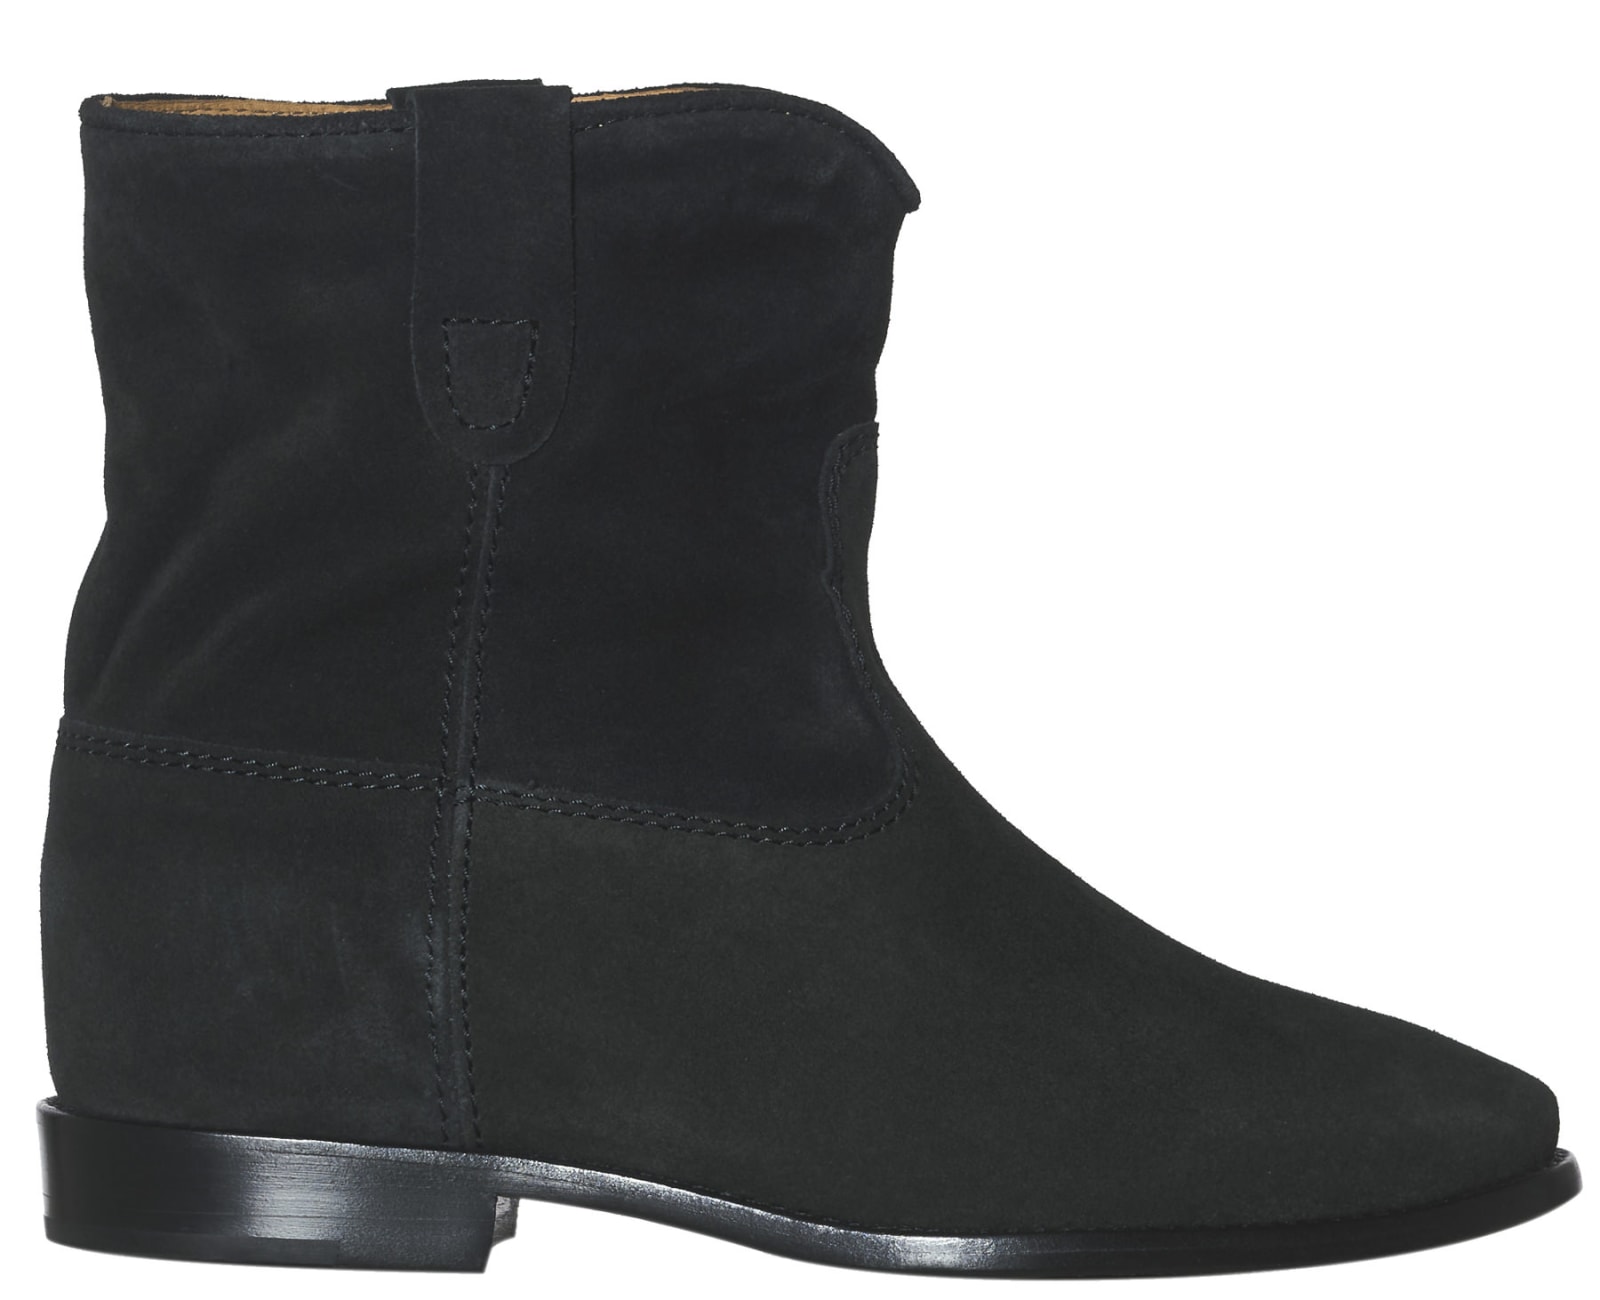 Buy Isabel Marant Crisi Boots online, shop Isabel Marant shoes with free shipping